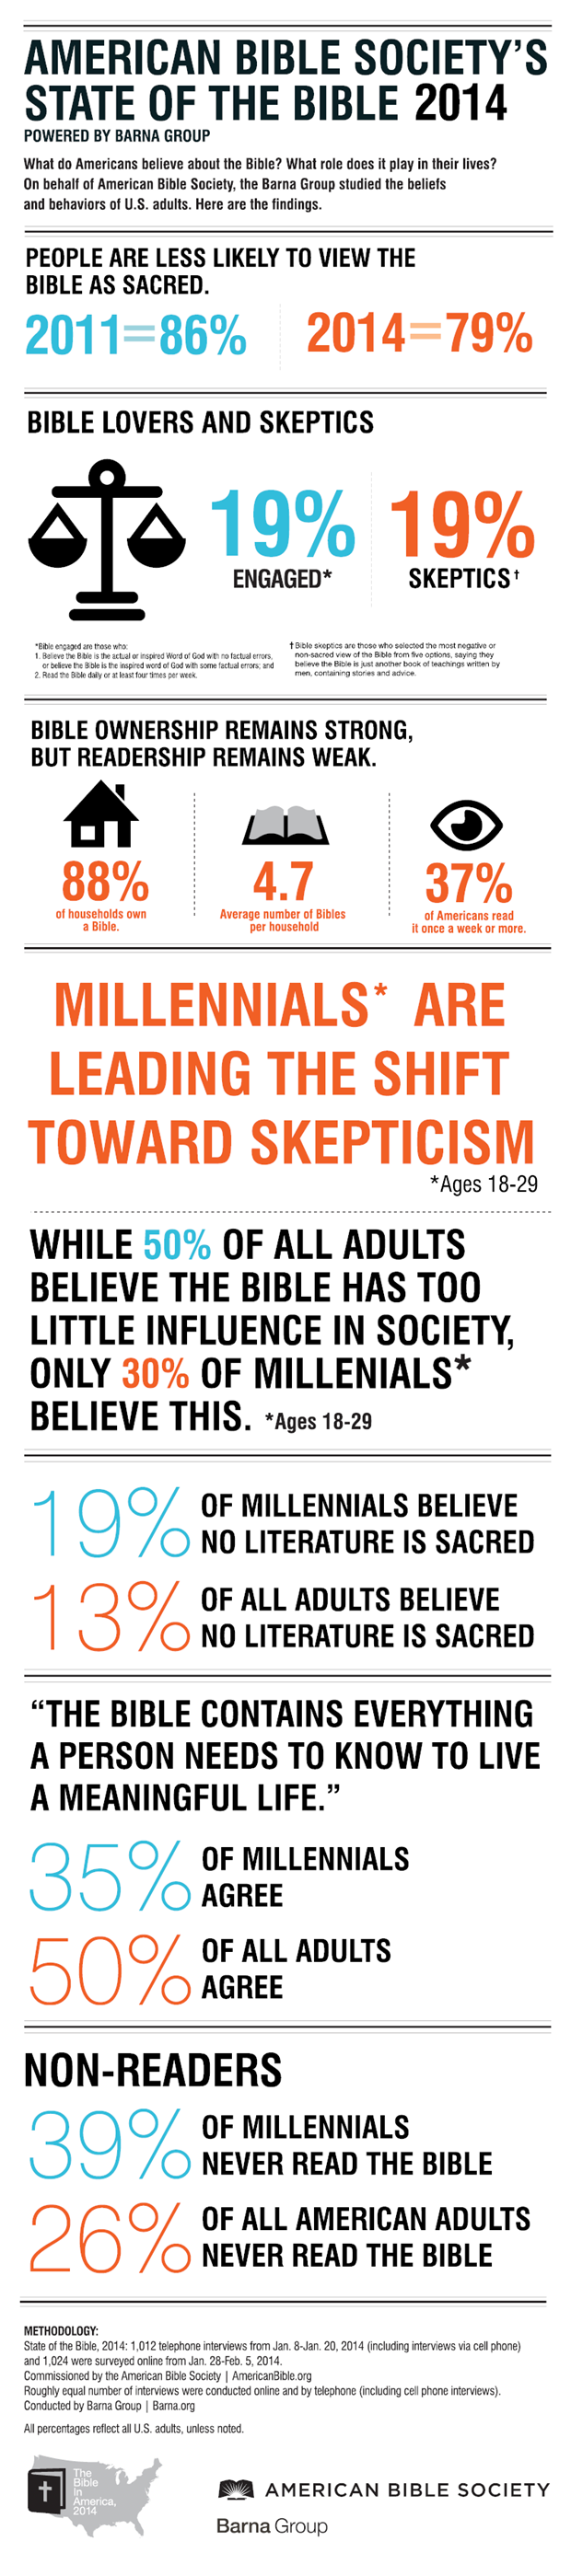 State of the Bible 2014